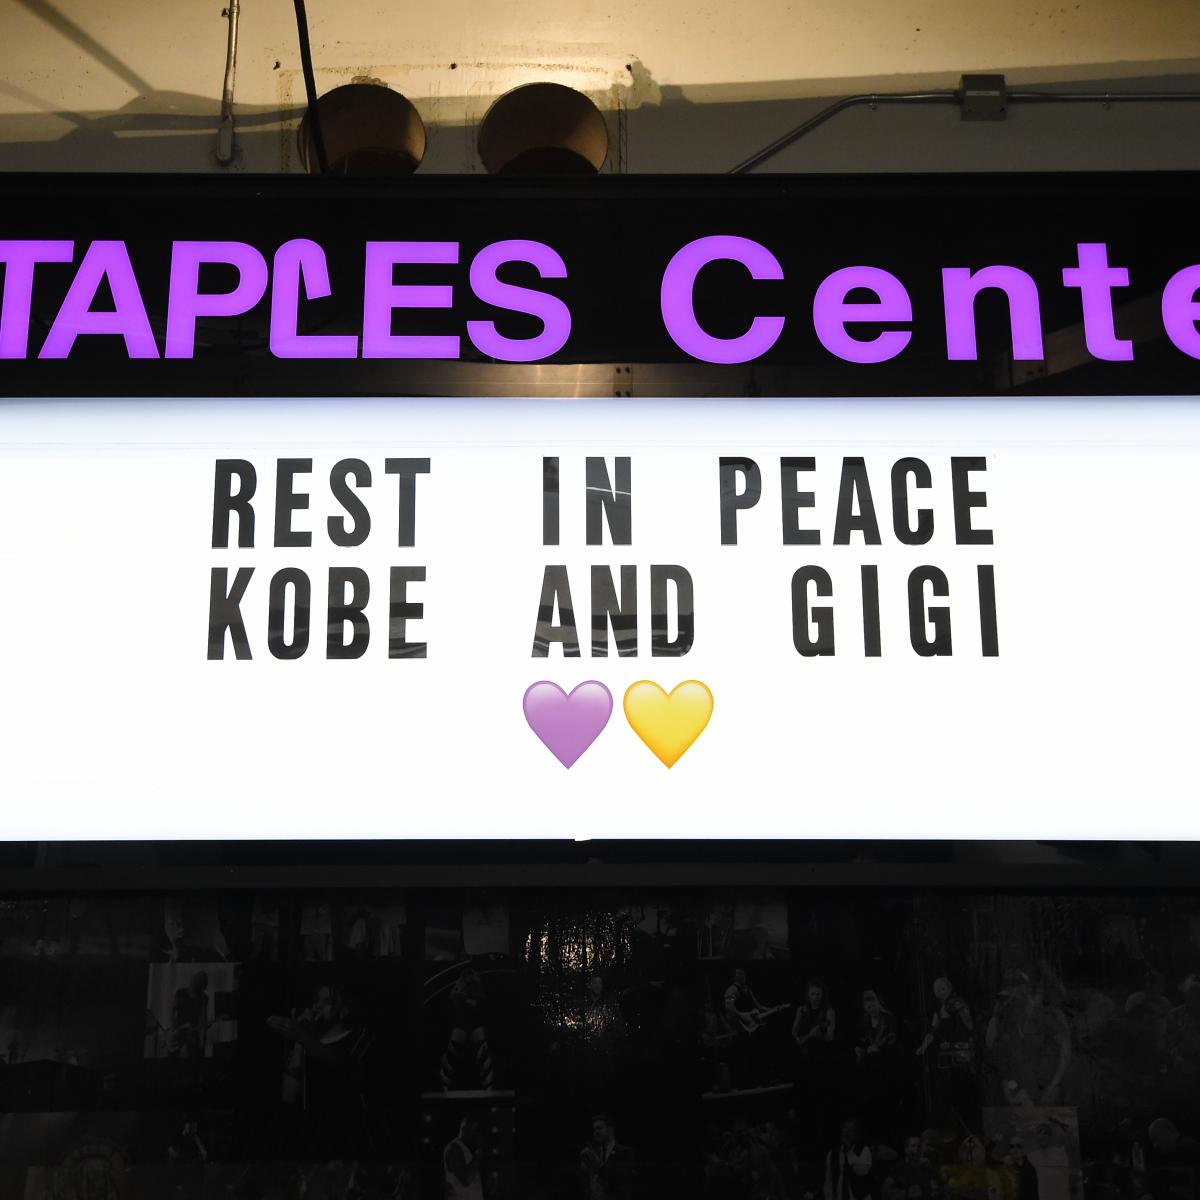 Paul George, Clippers Players Honor Kobe Bryant at Staples Center | Bleacher Report ...1200 x 1200